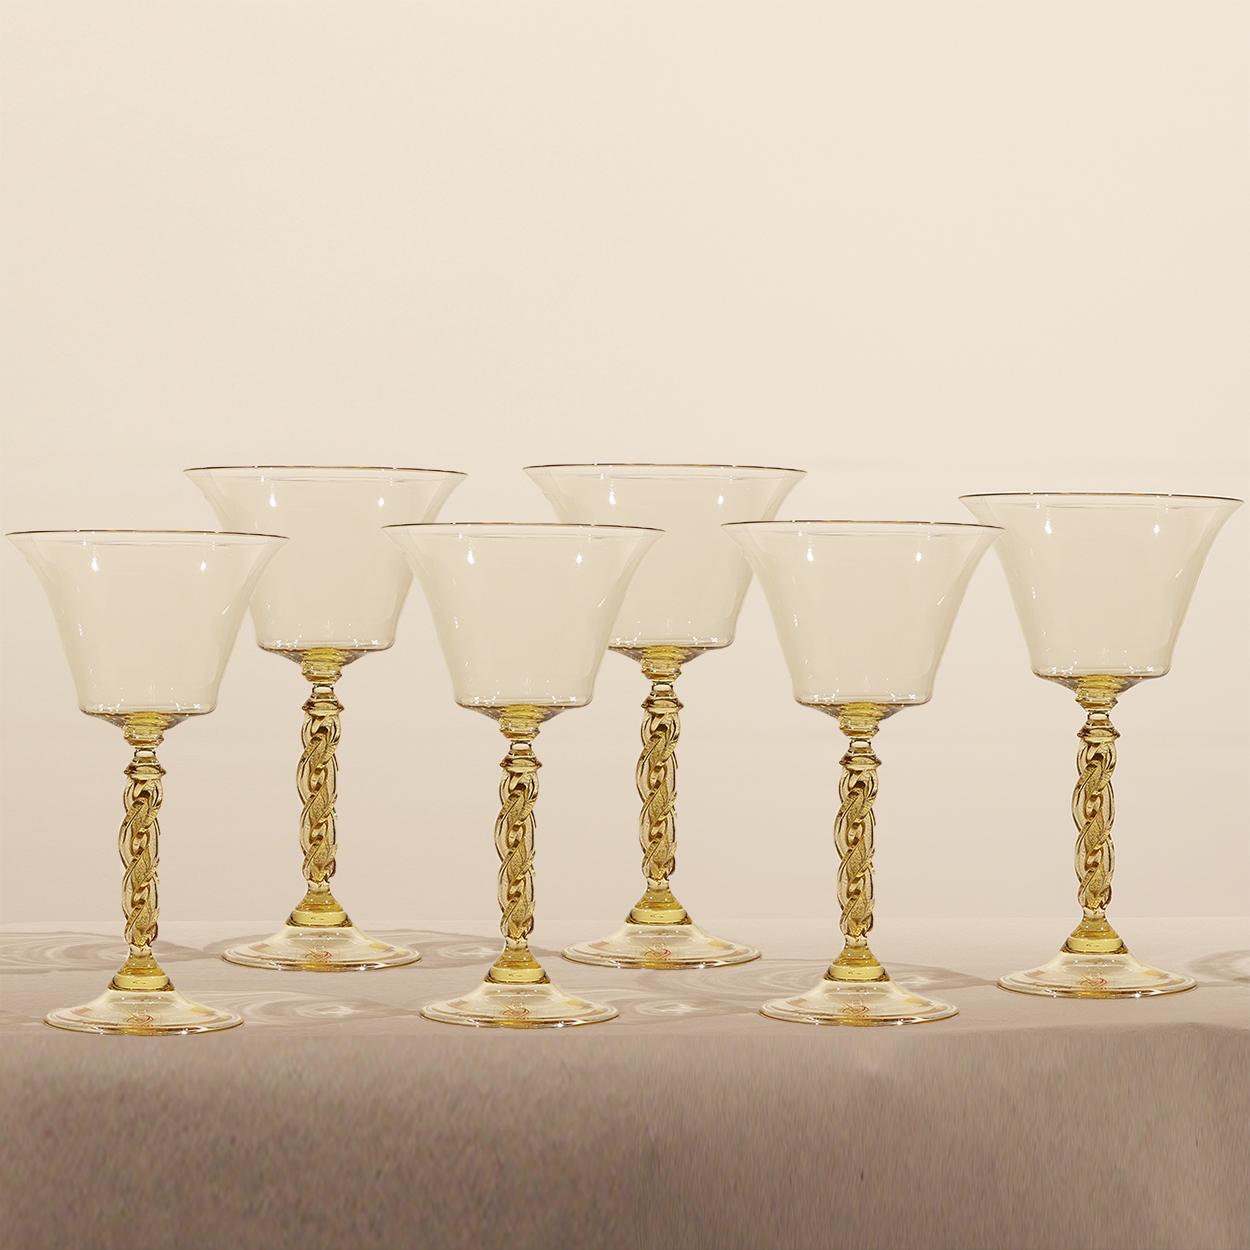 1 of the 6 gorgeous hand-blown Signoretto Glass/Goblets with a wonderful clear and gold infused in the glass. Get a feel for how Venetian nobles lived and entertained centuries ago and enjoy Old World European elegance with these fine Venetian Glass